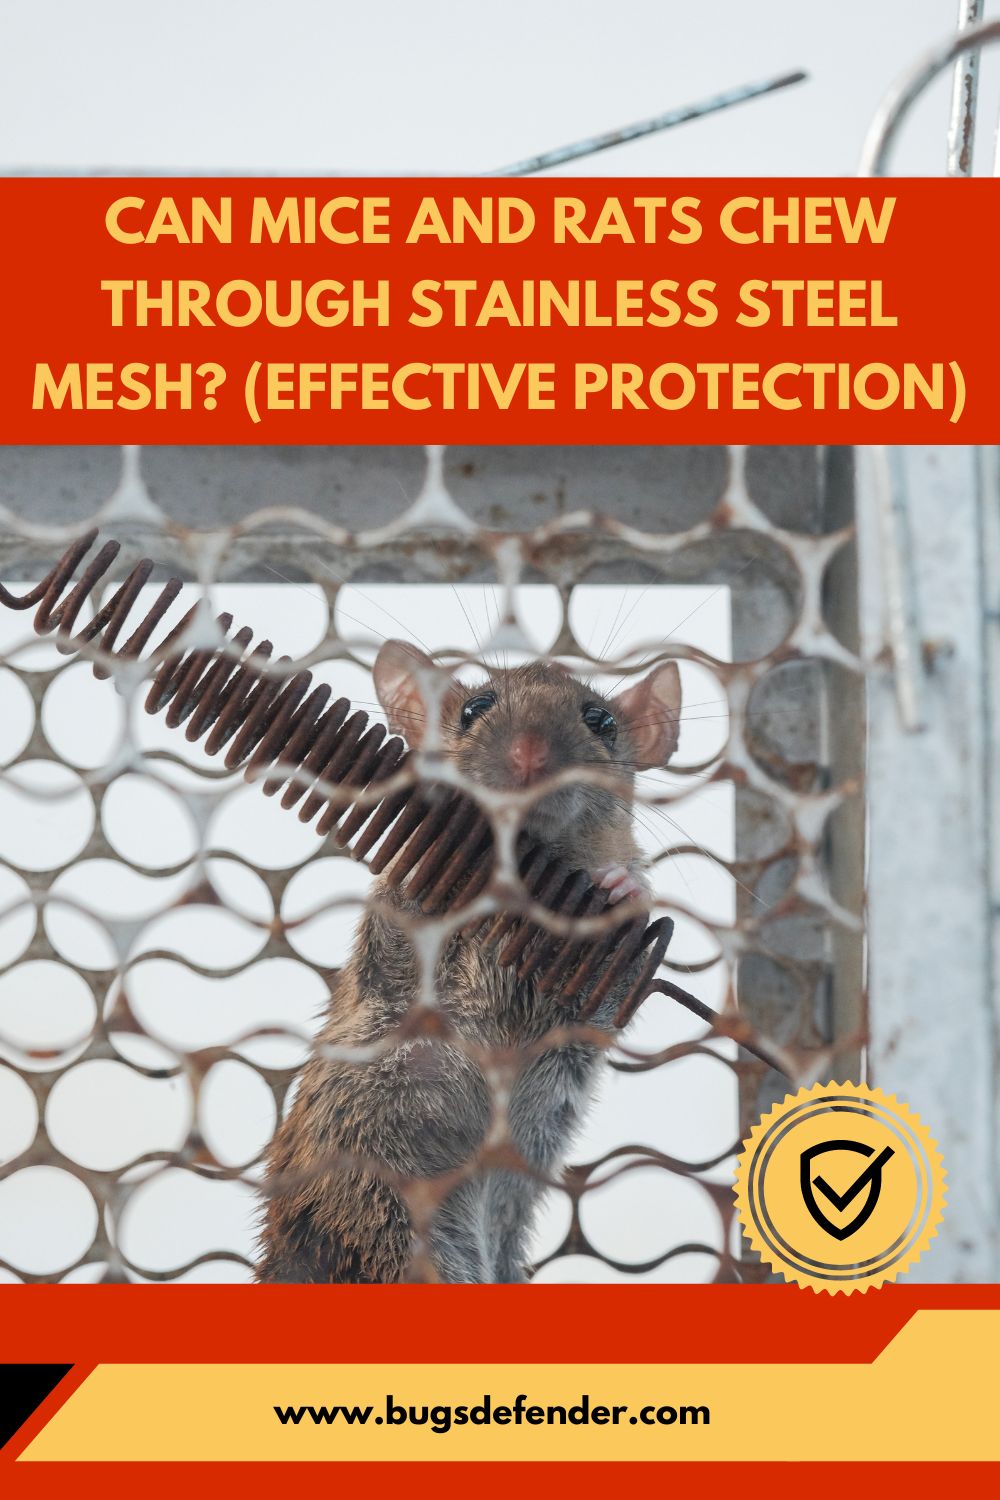 Can Mice and Rats Chew Through Stainless Steel Mesh? (Effective Protection) pin 1